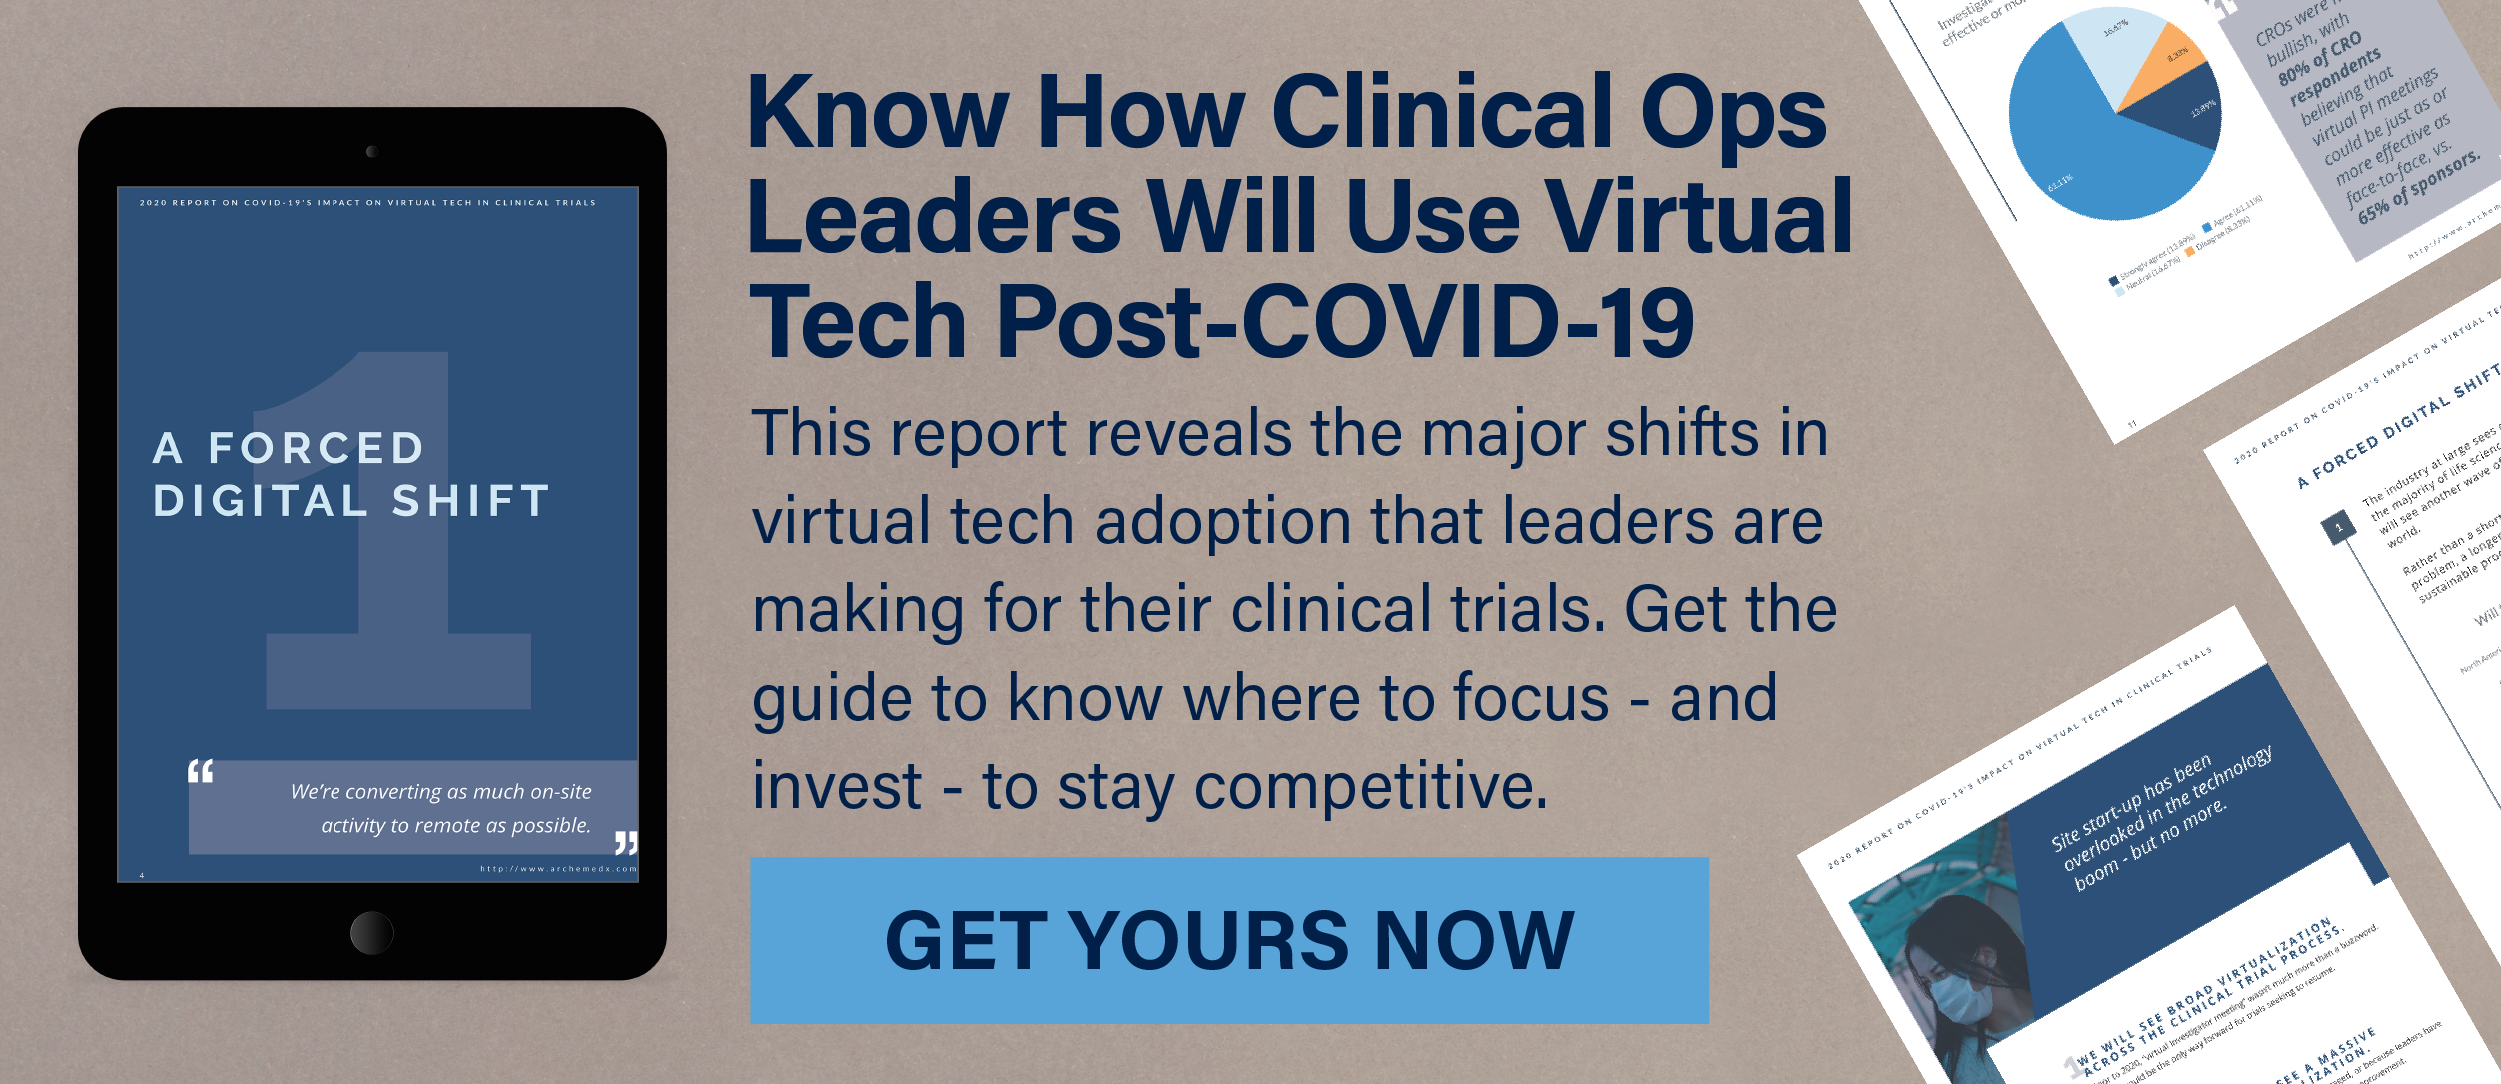 Virtual Tech Use in Clinical Operations